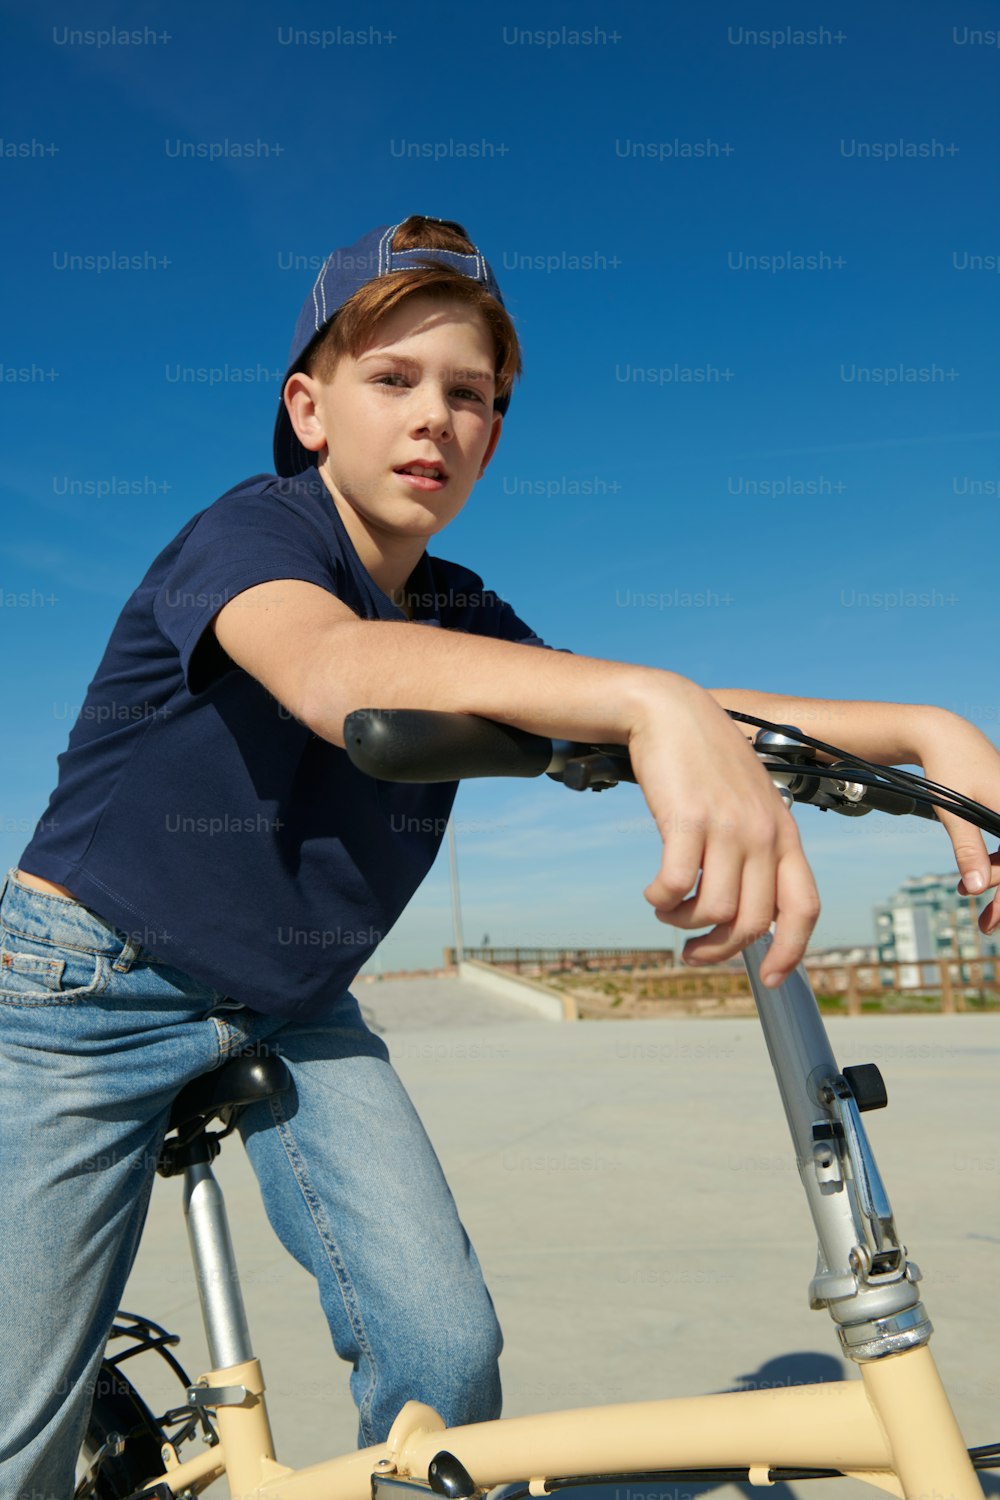 a young boy is riding a bicycle in a parking lot